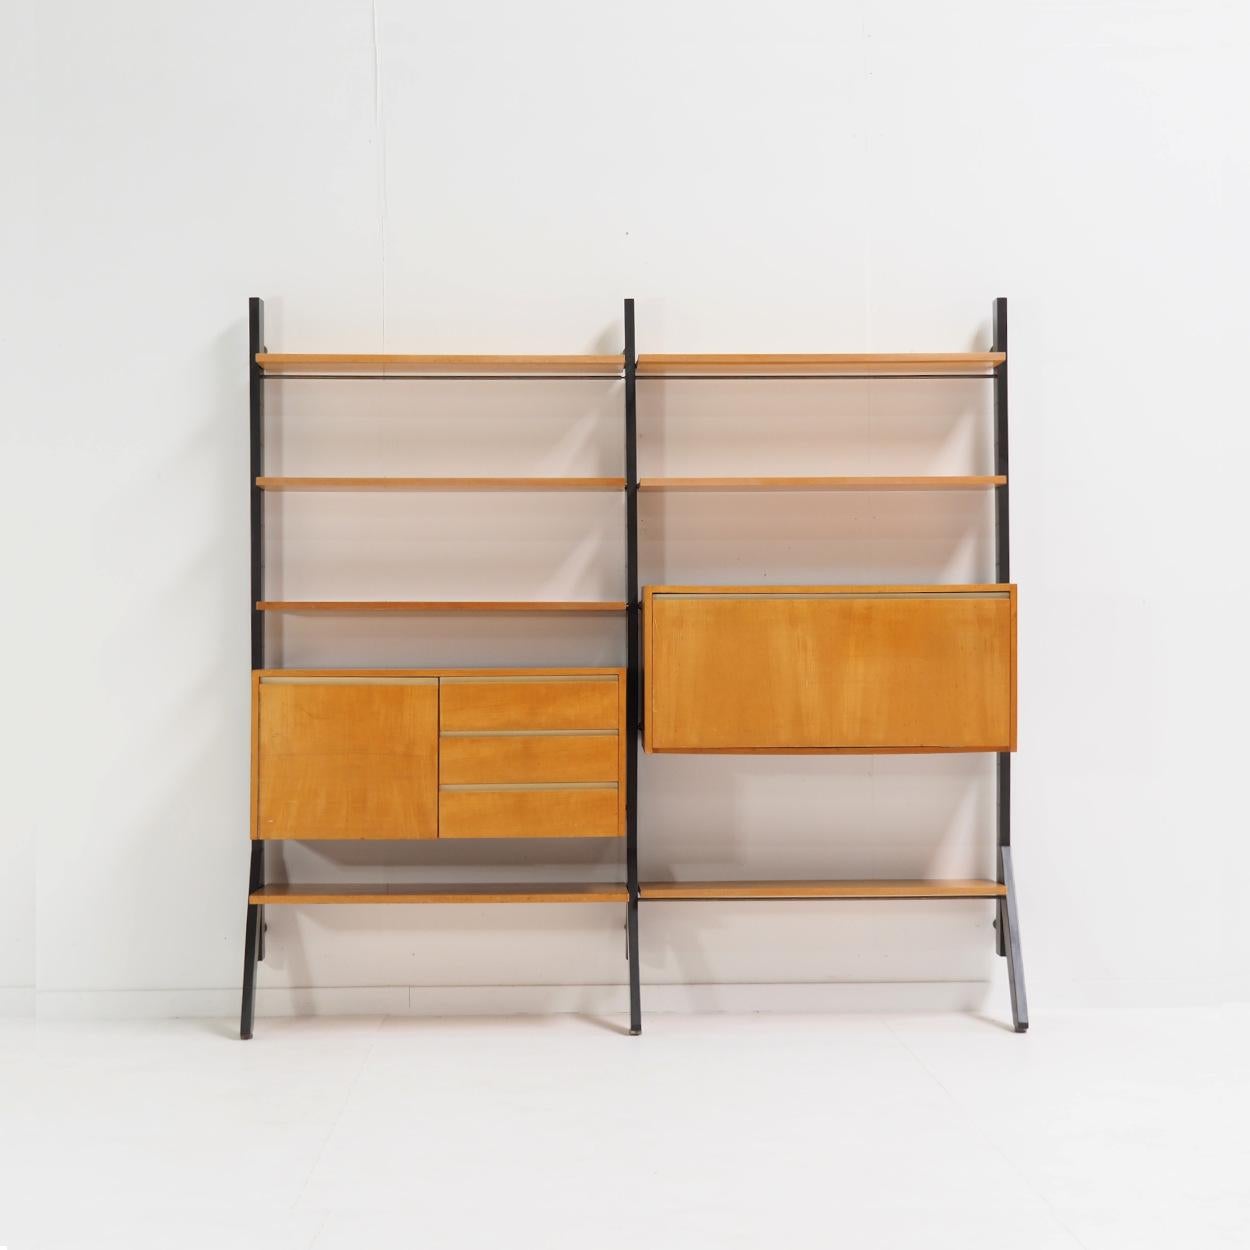 Wall unit ‘Module’ designed in 1956 by Kho Liang Ie for the Dutch furniture company Fristho.

The wall unit is made of beech and dark grey painted wood and consists of shelves, a storage compartment and a secretary element. In good vintage